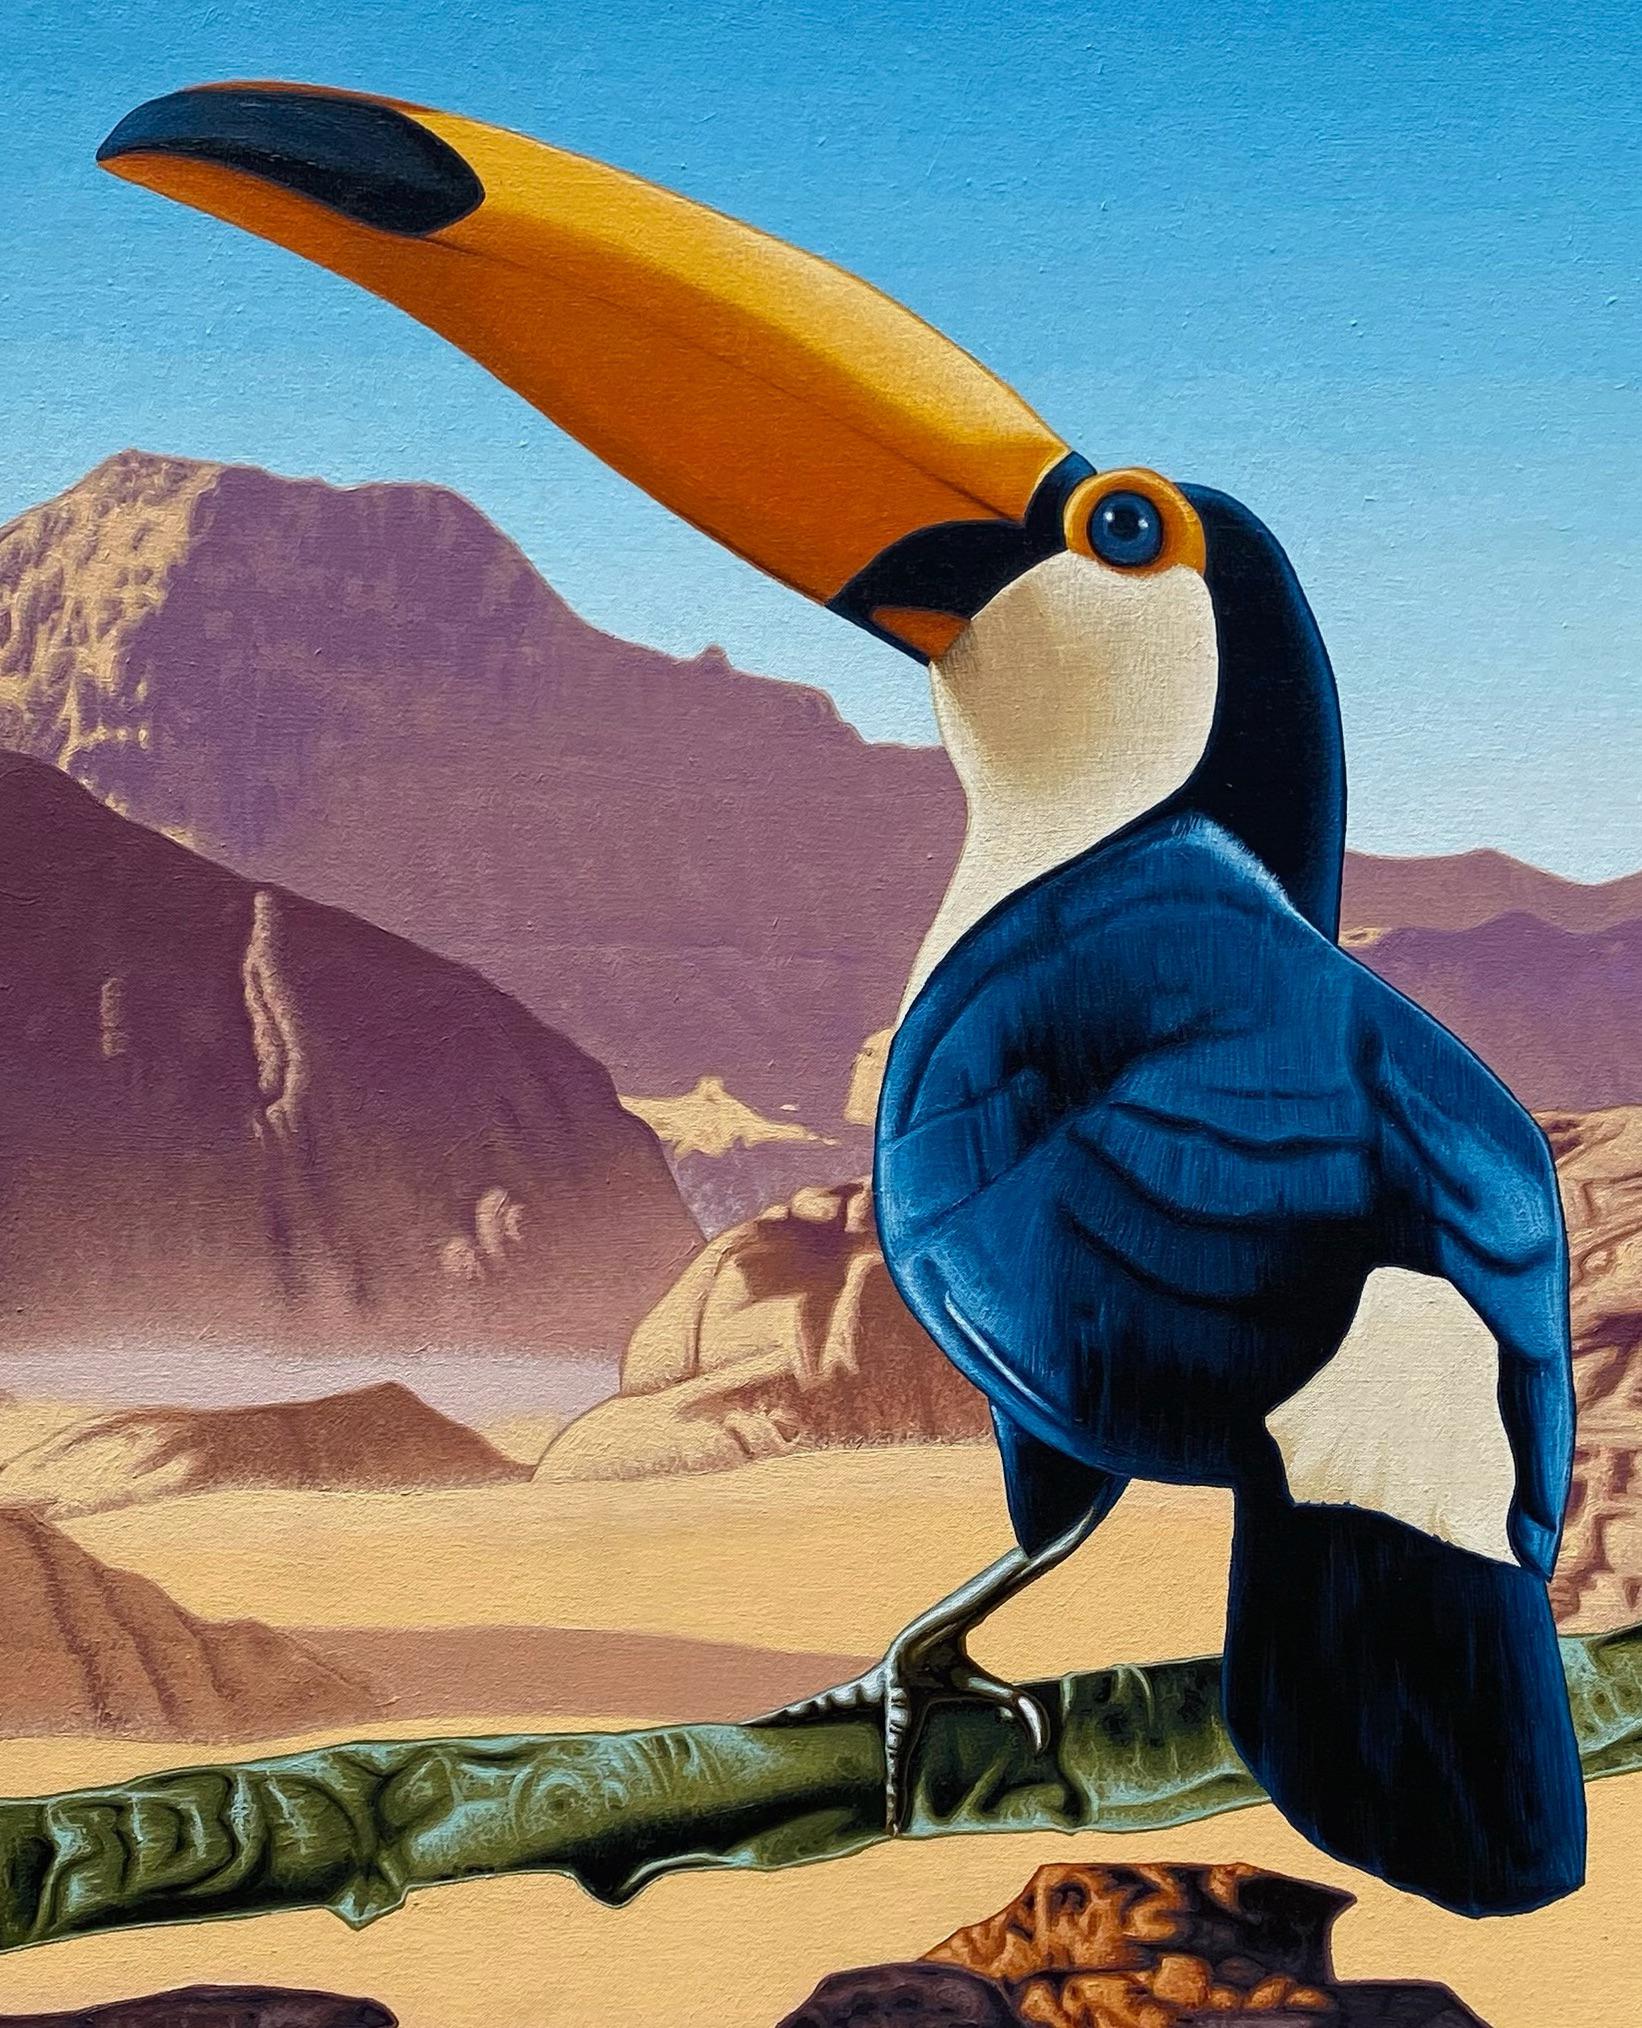 Toucan in desert: “No Mirage”  - Painting by Stephen Hall